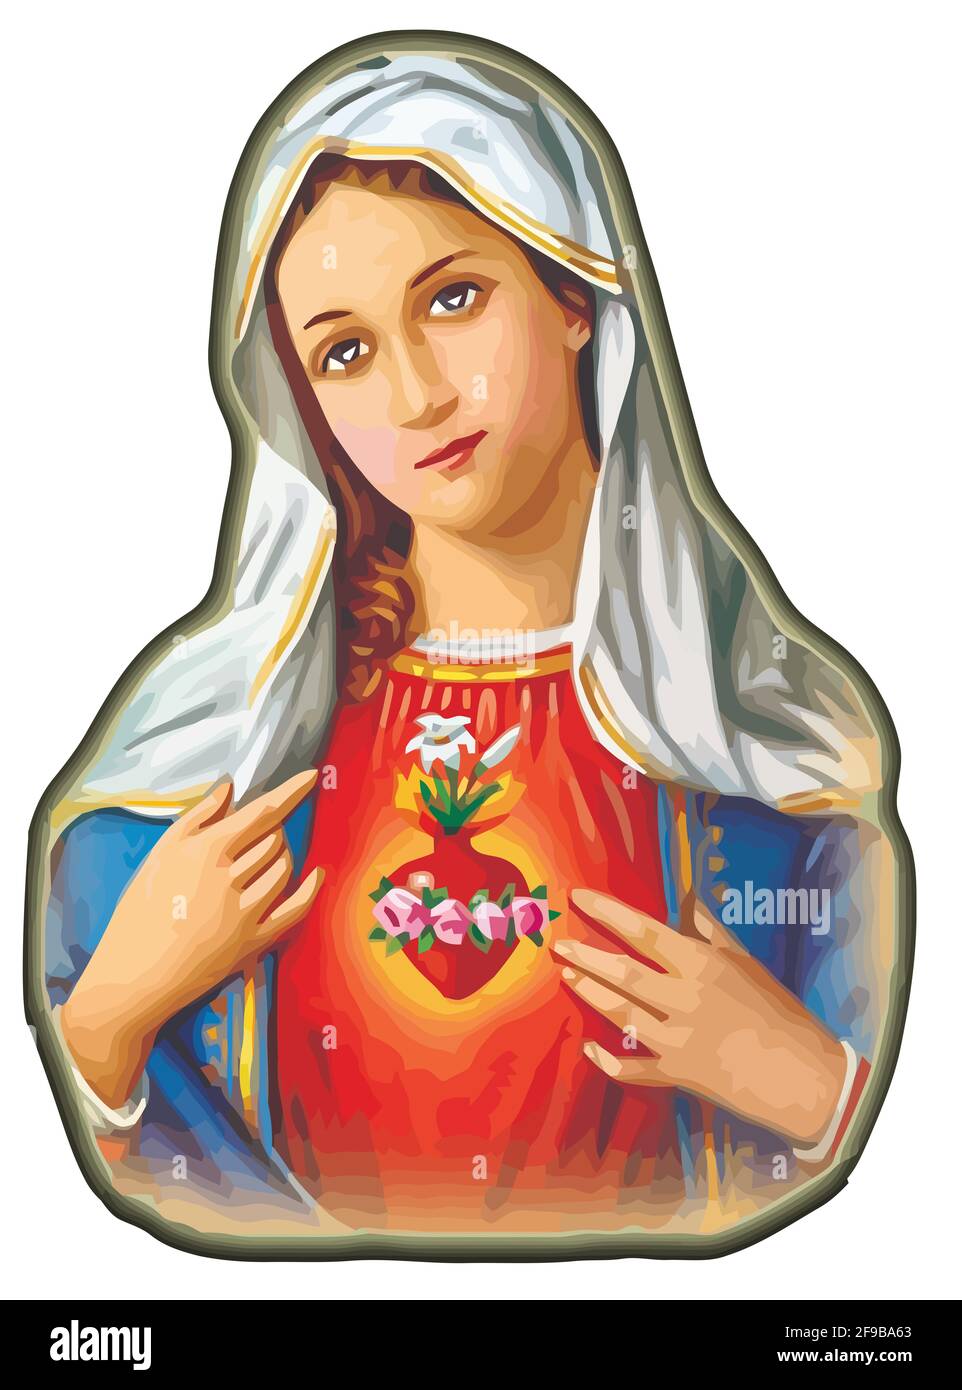 immaculate heart of lady mary sacred faith religion mother illustration Stock Photo